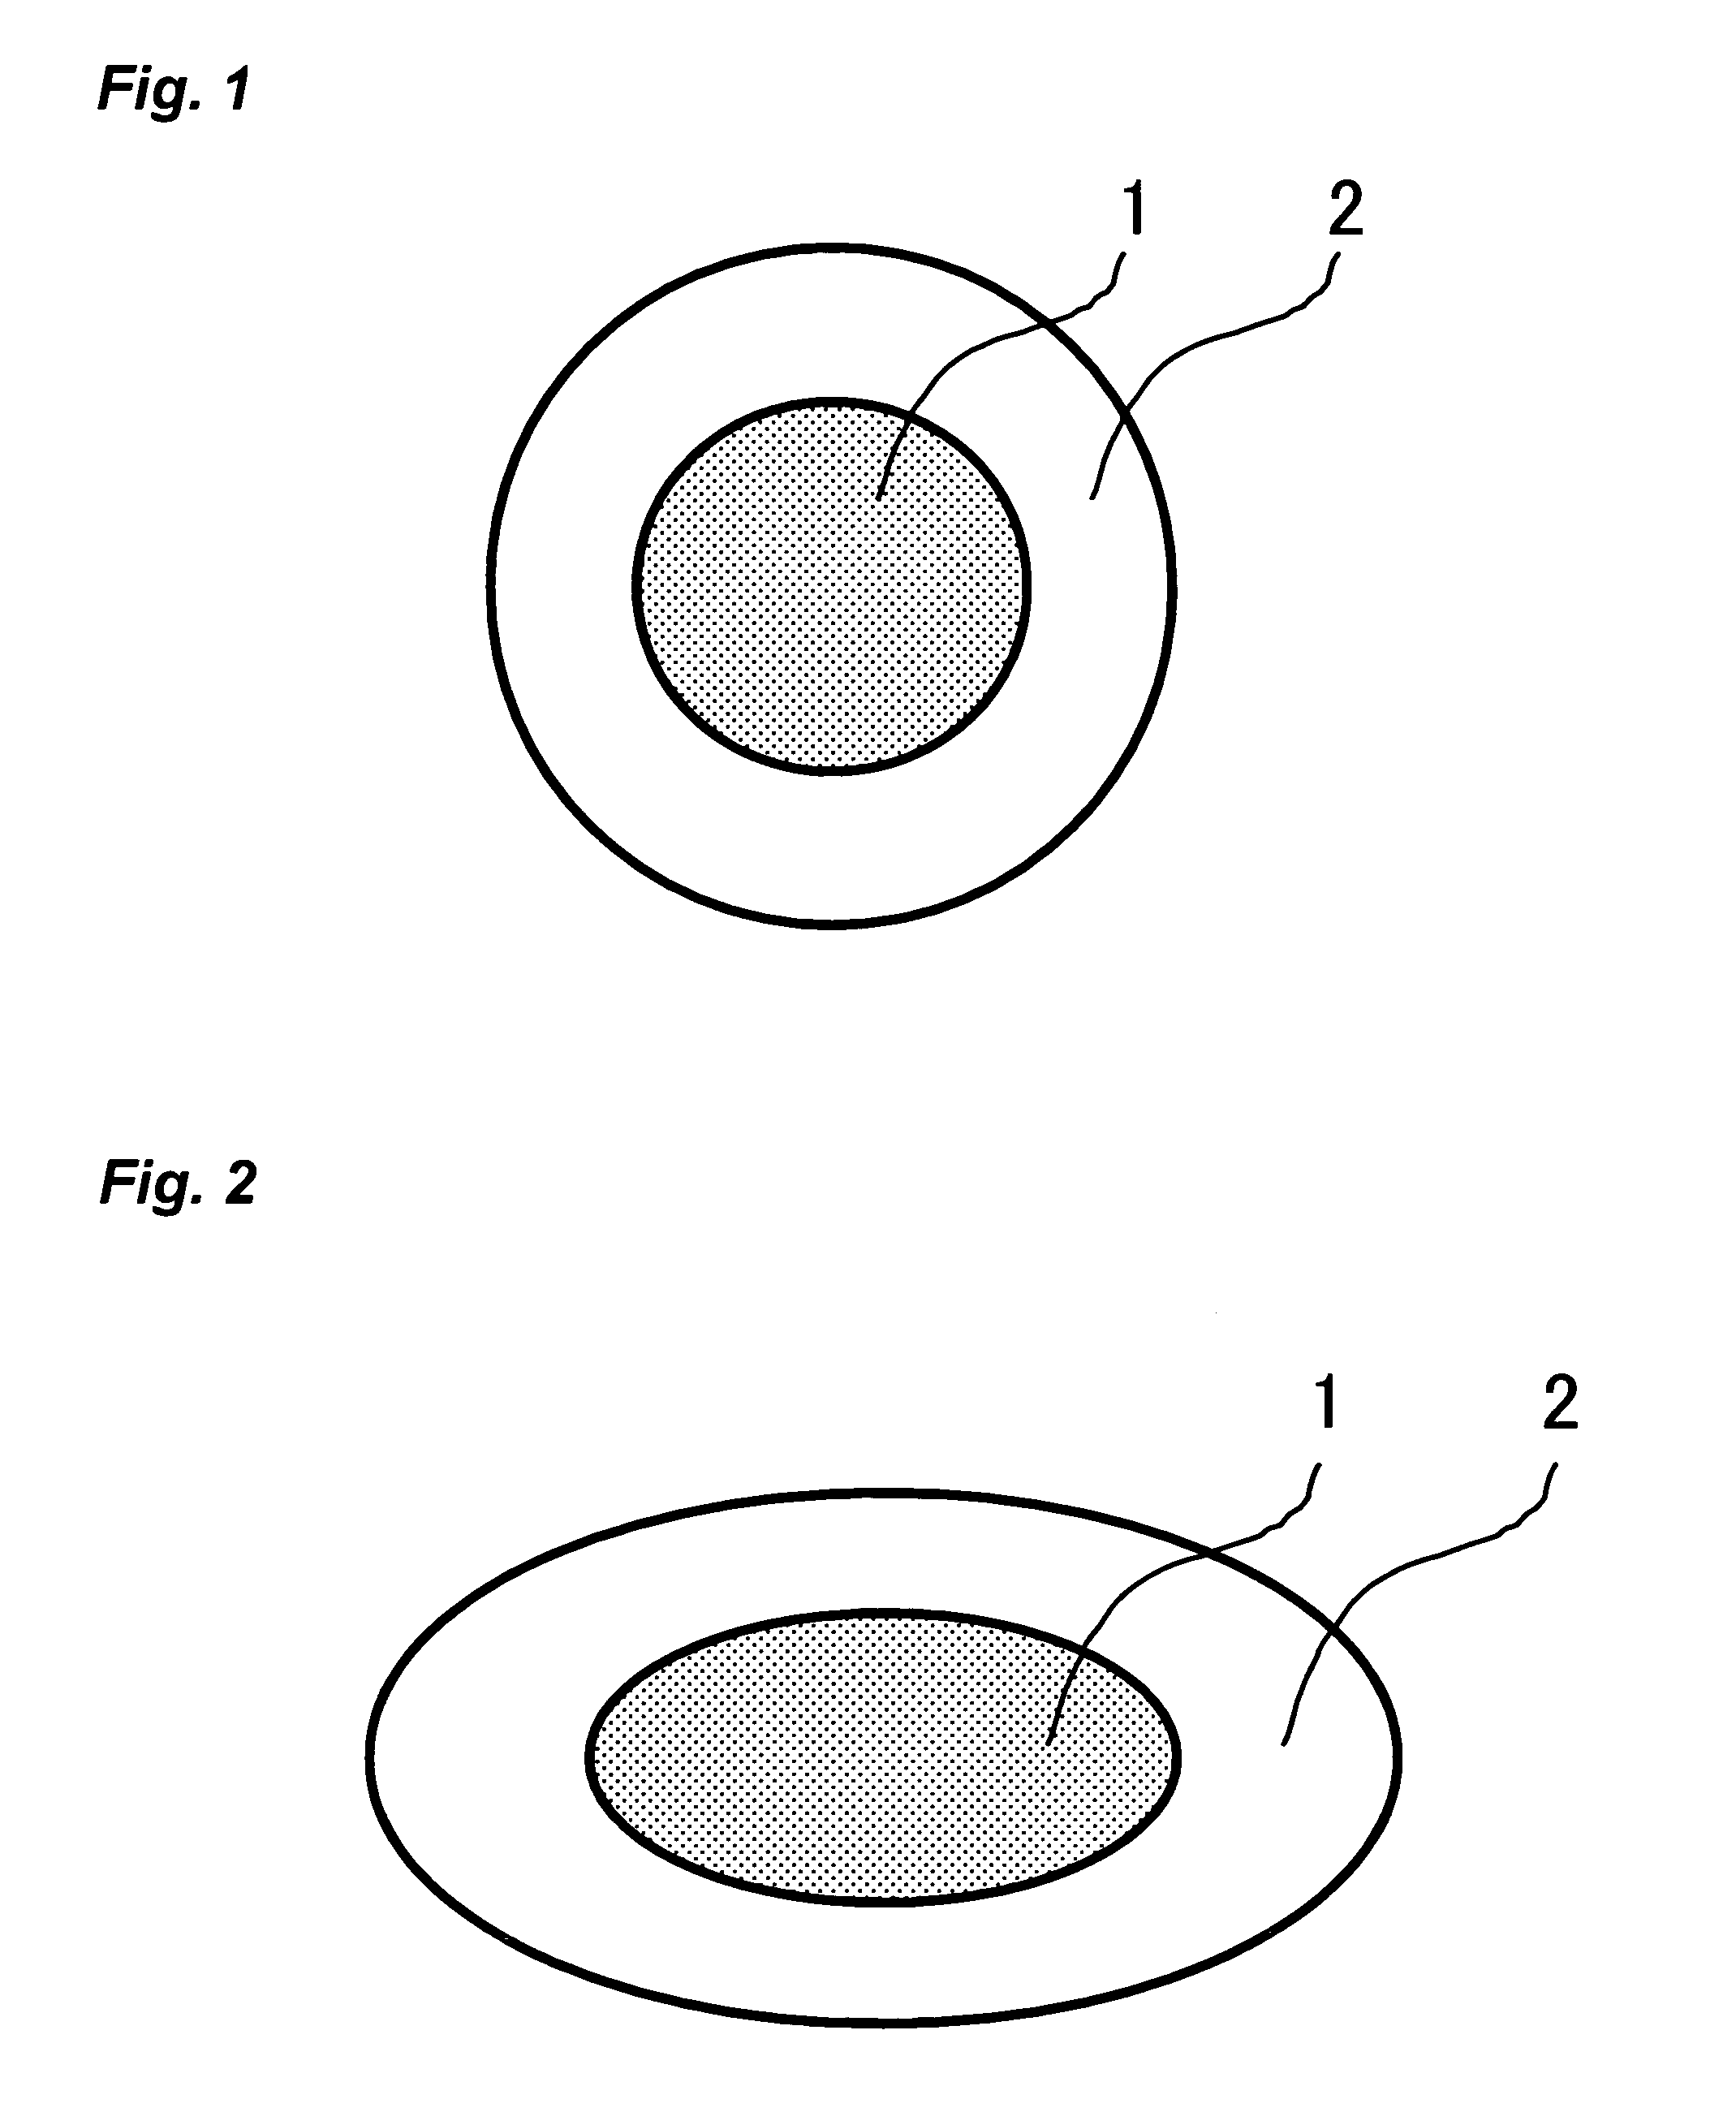 Carbon fiber reinforced resin composition, molding compounds and molded products therefrom